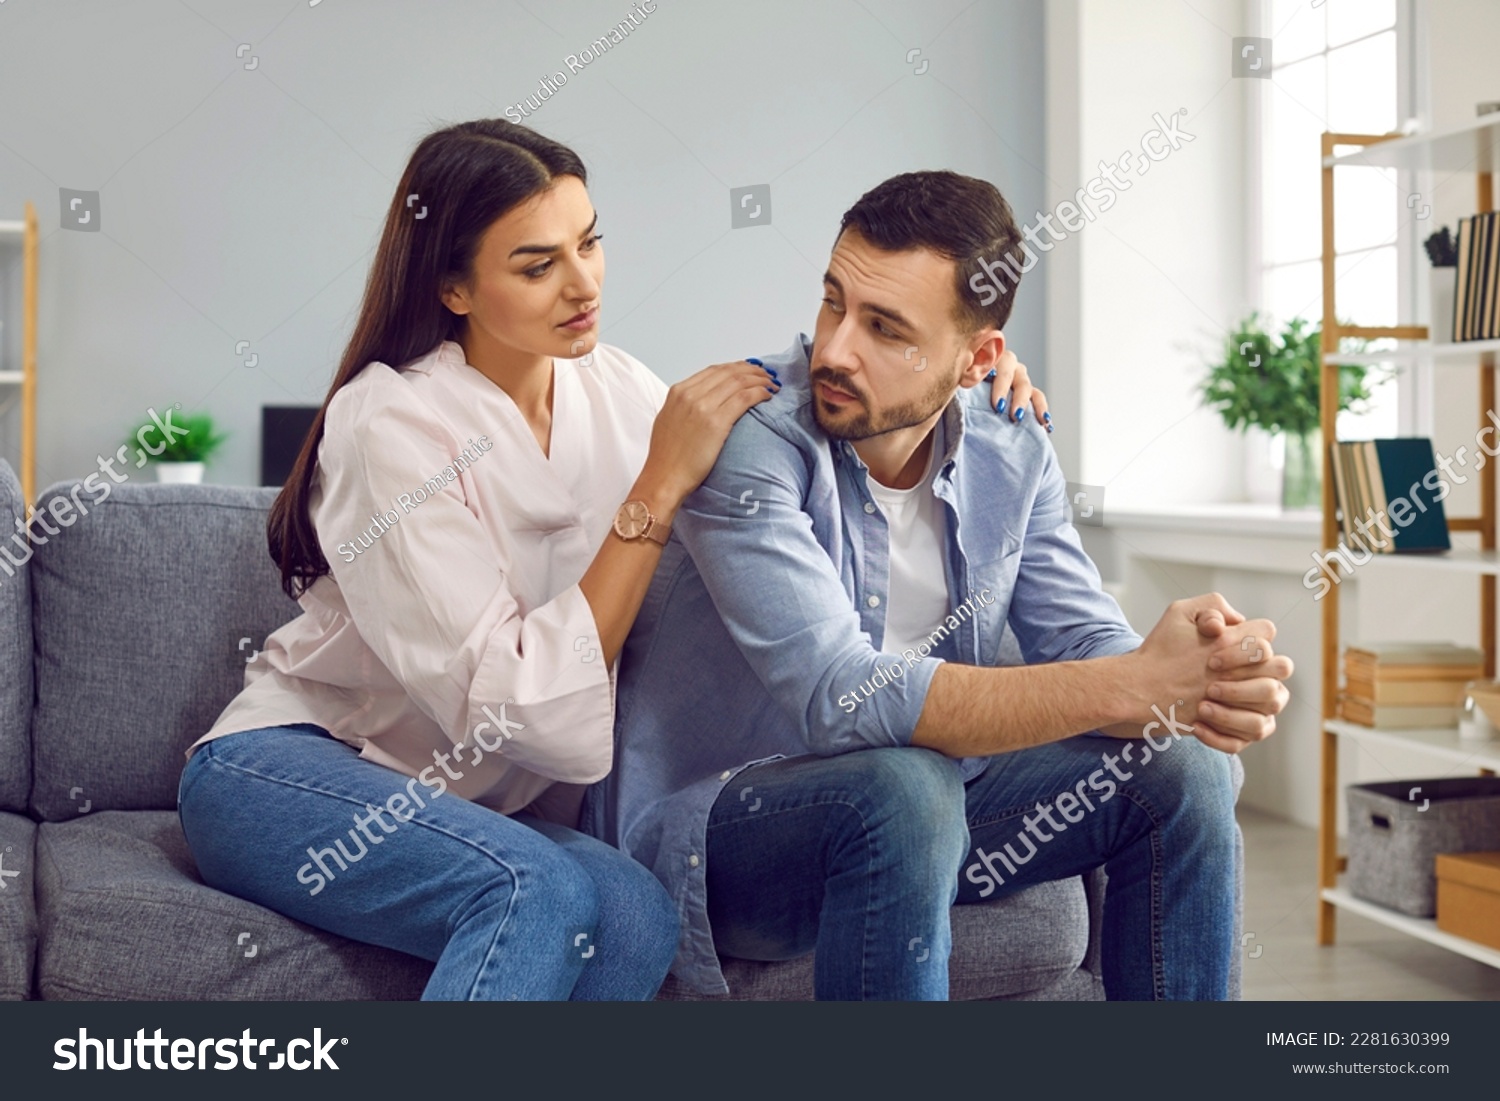 Attractive wife hugging husband from back to comfort or apologize. Young woman hugging upset man, expressing understanding, saying sorry, showing support. Couple sitting on sofa at home #2281630399